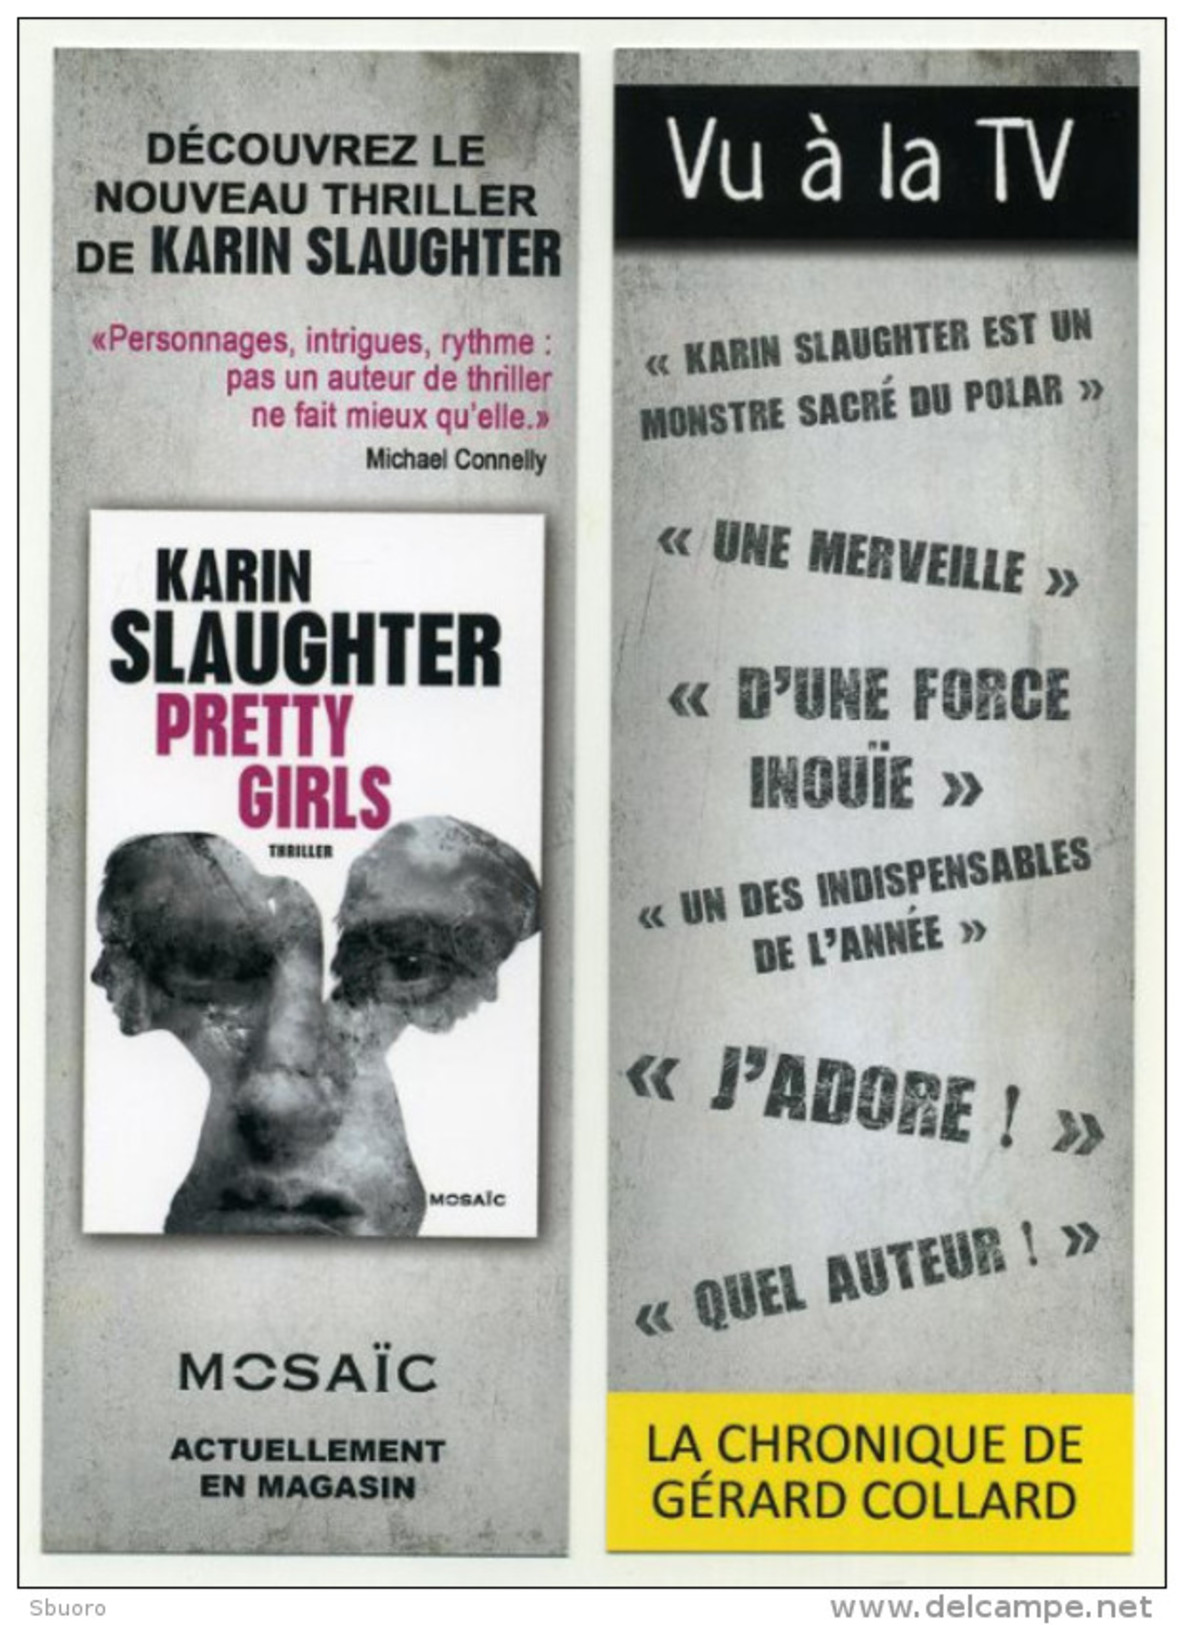 Marque-page - Pretty Girls, Le Nouveau Thriller De Karin Slaughter. Editions Mosaic - Marque-Pages